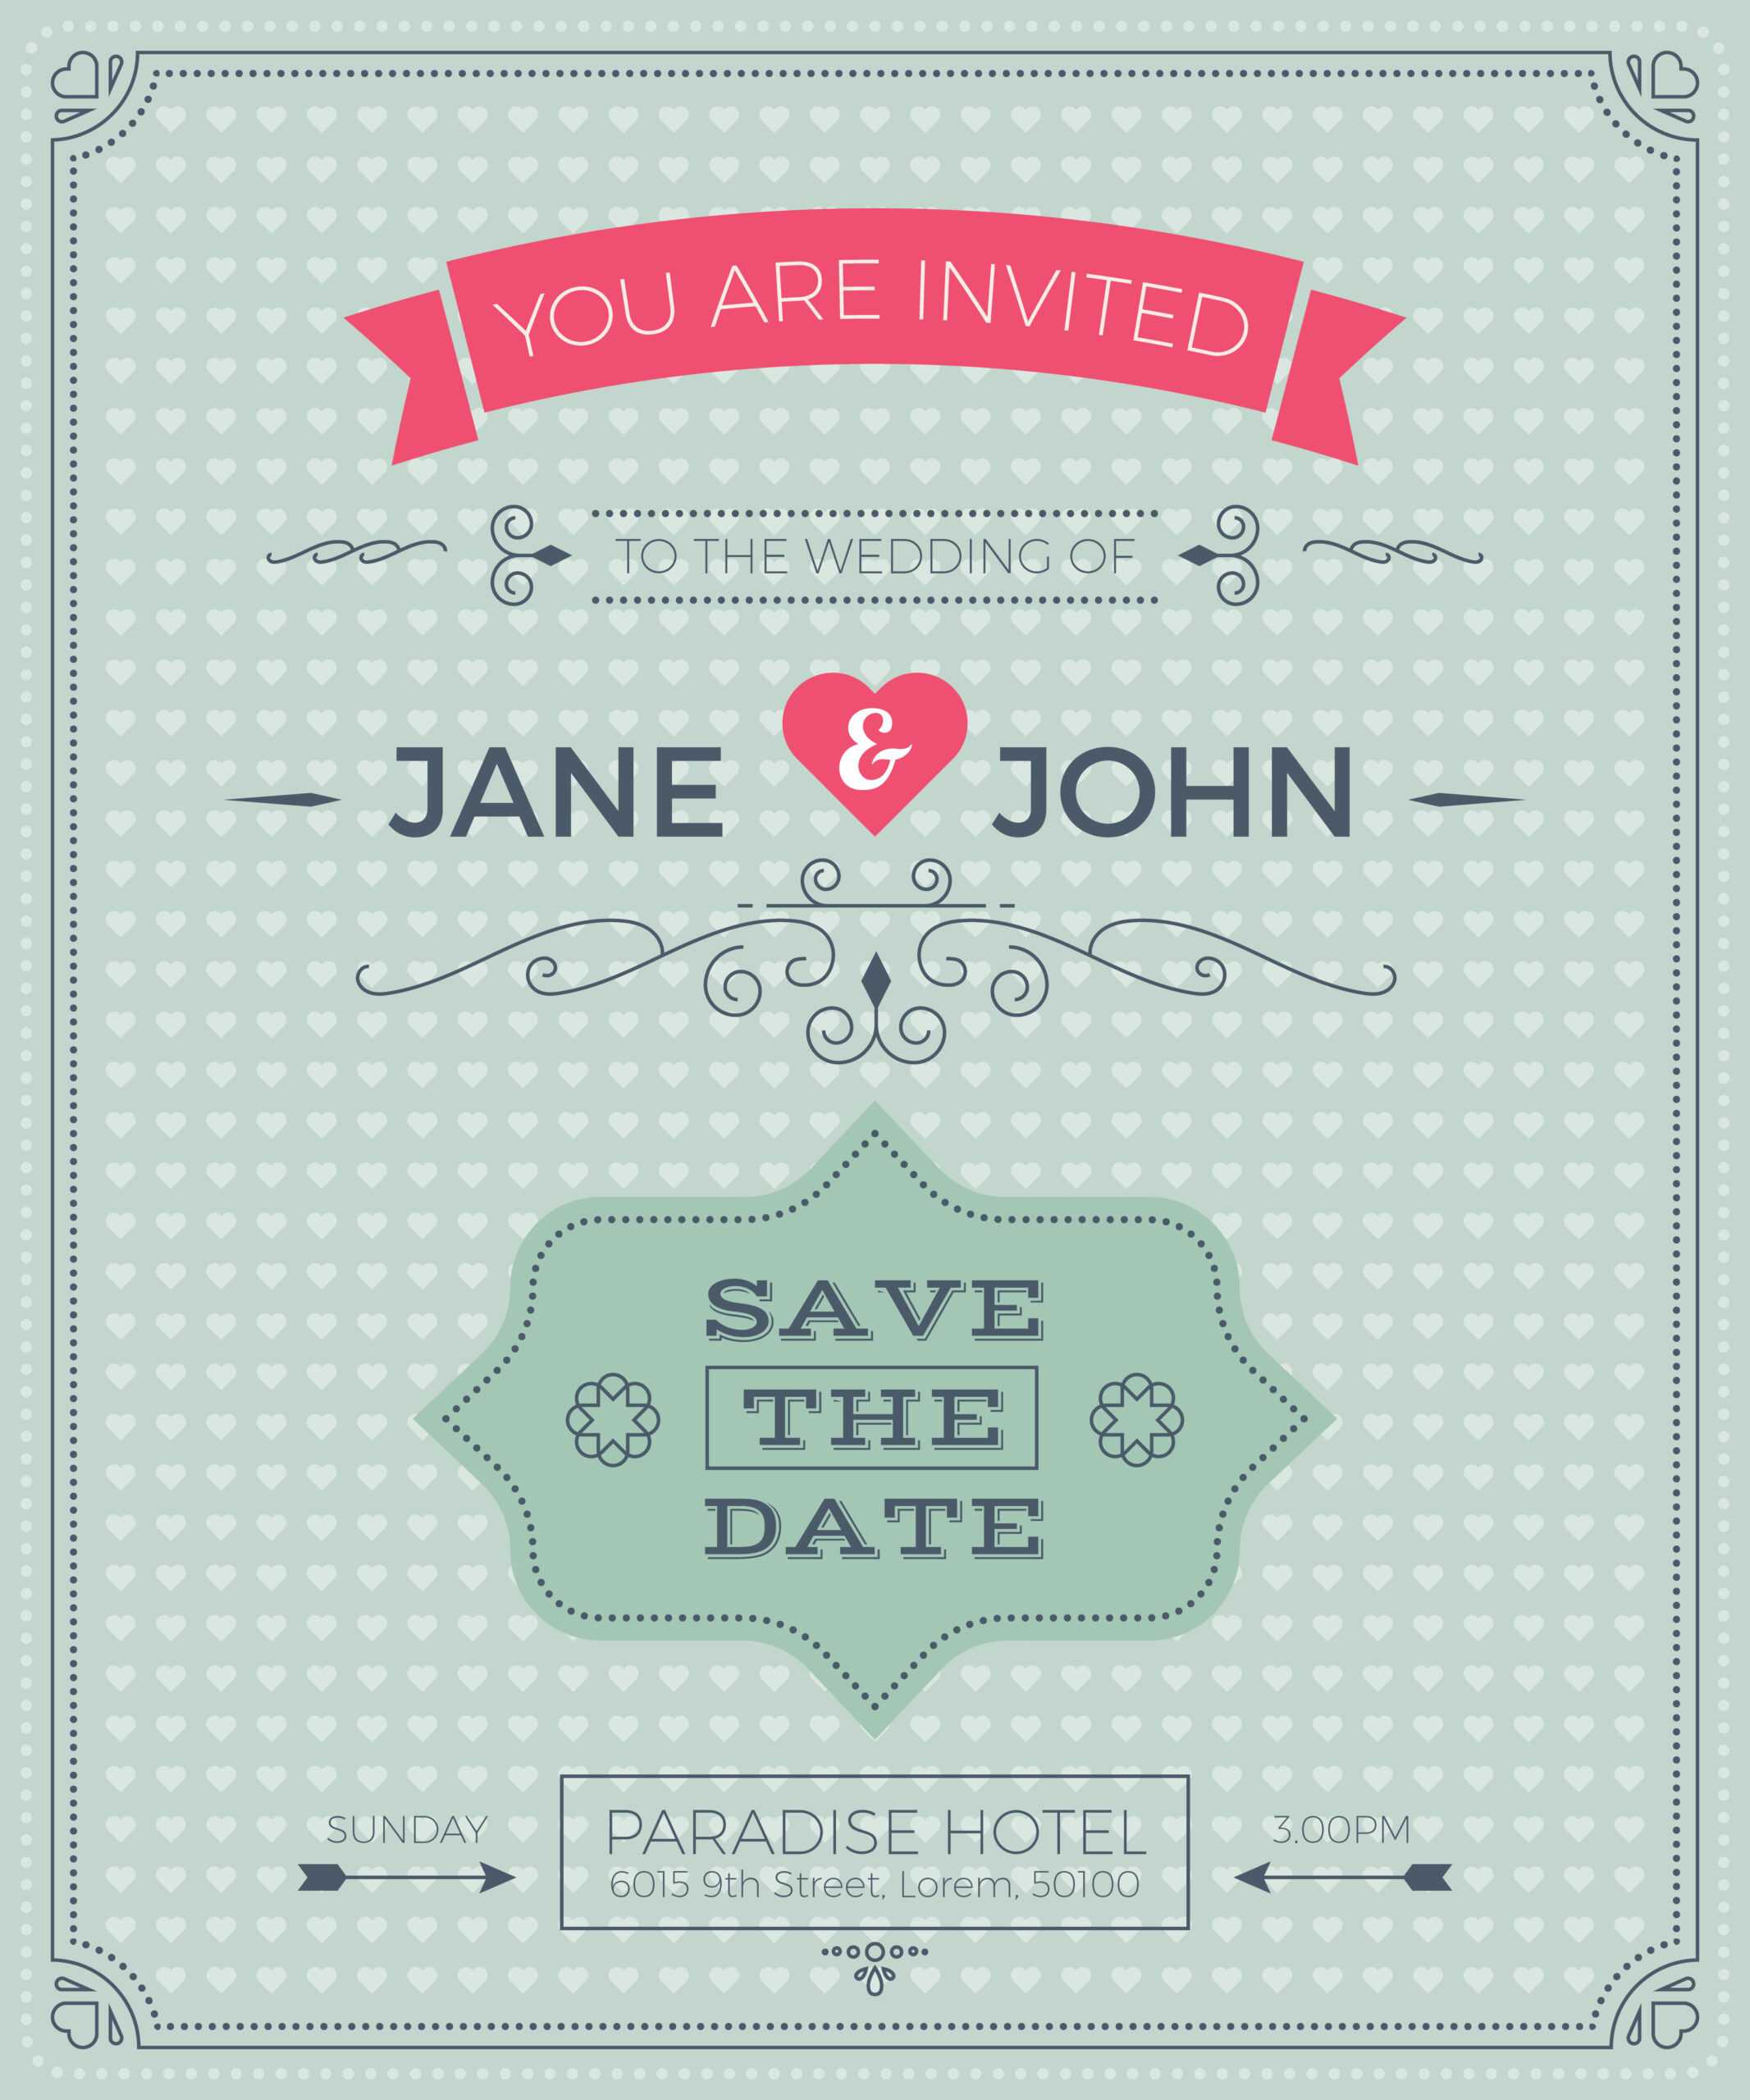 Vintage Wedding Invitation Card Template – Download Free With Ss Card Template